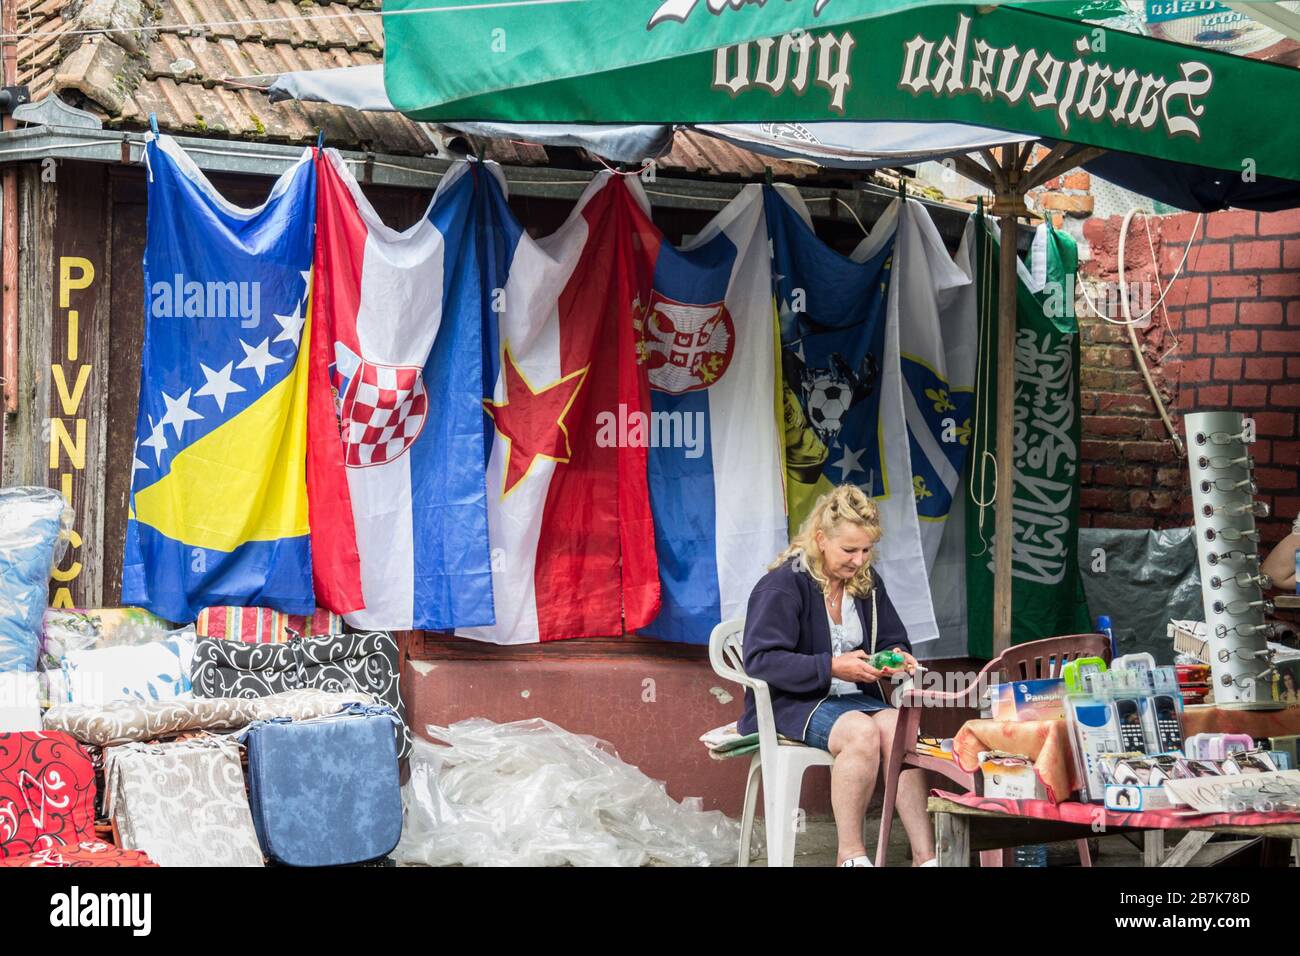 BRCKO, BOSNIA - JUNE 19, 2016: Flags of Bosnia and Herzegovina, Serbia, Croatia and Yugoslavia on display on a market in the district of Brcko, with i Stock Photo